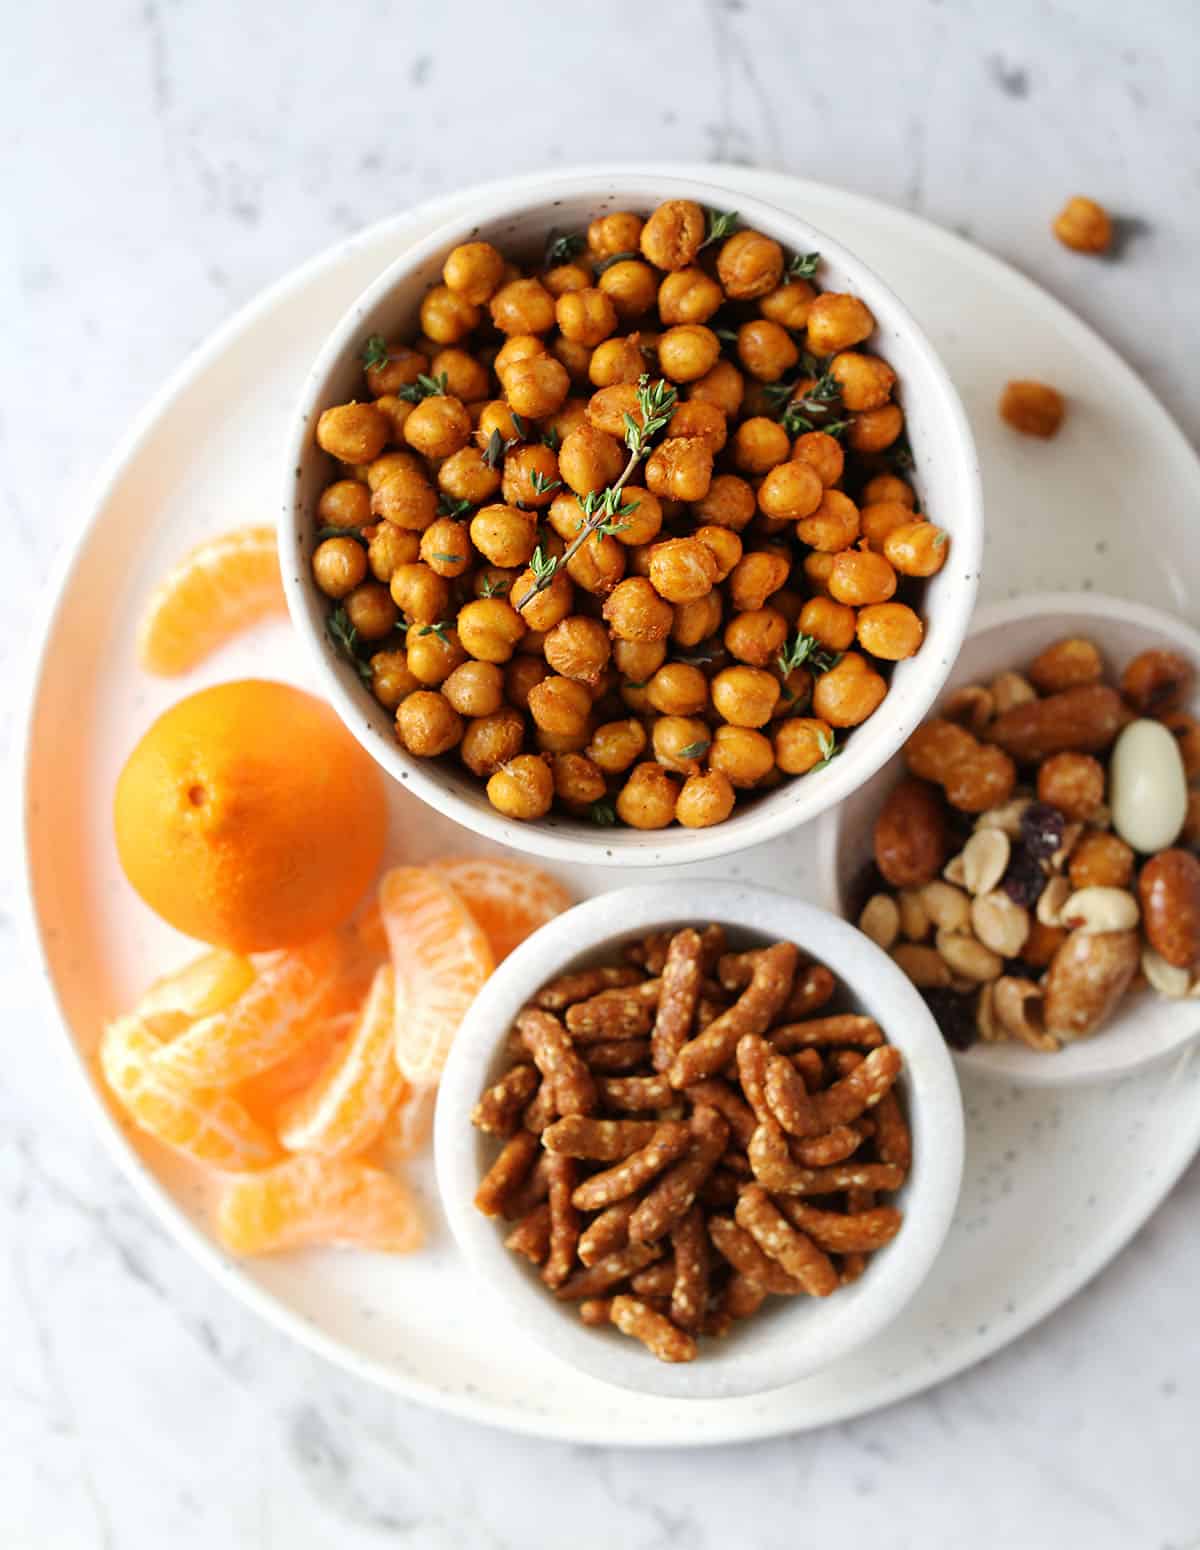 a snack plate consisting of a plasticizer, air-fried chickpeas, crackers, and trail mix. 